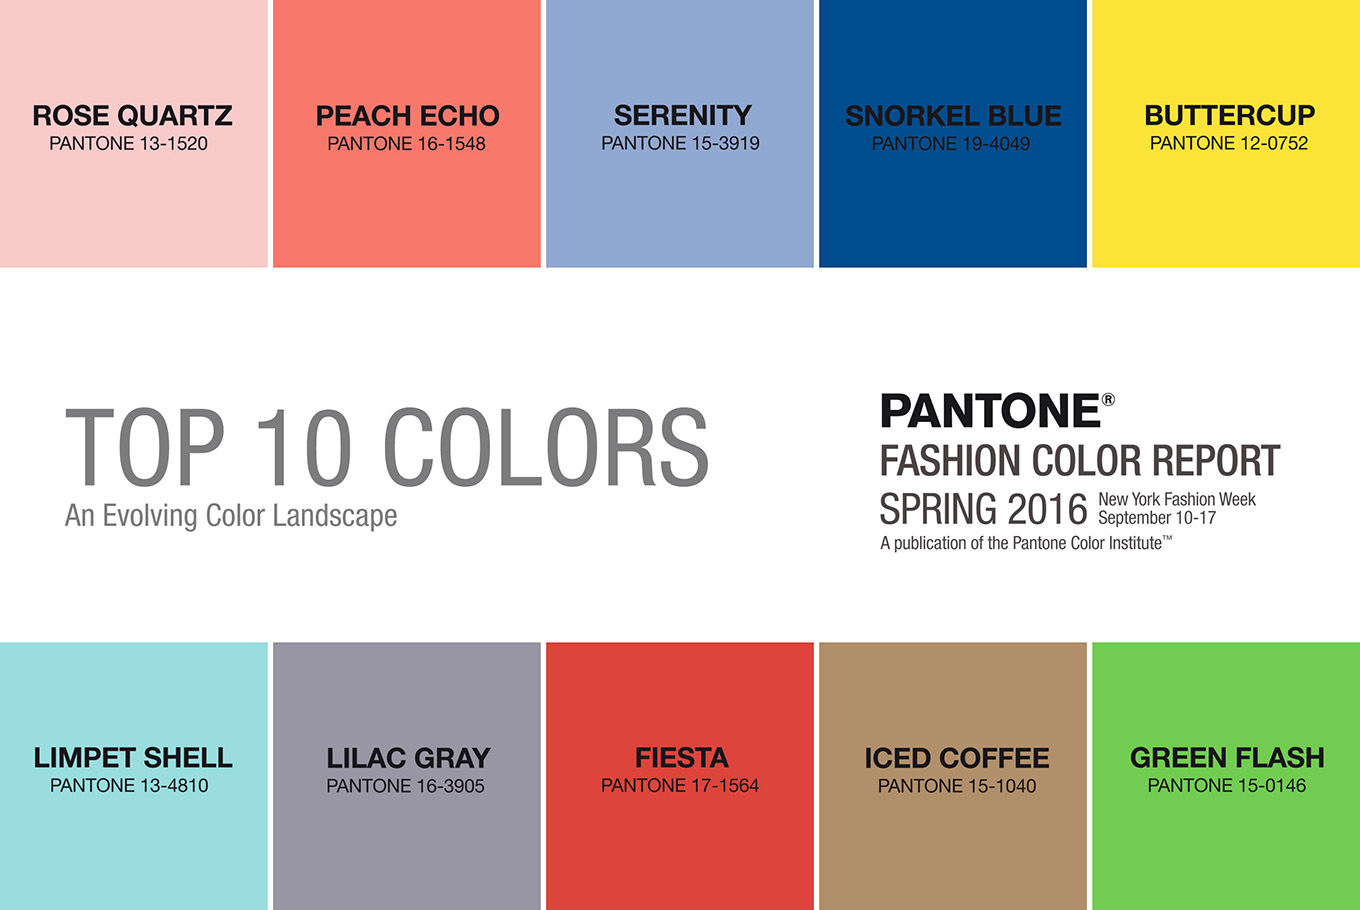 How To Wear The Pantone Colors Of 2016 According To Your ...